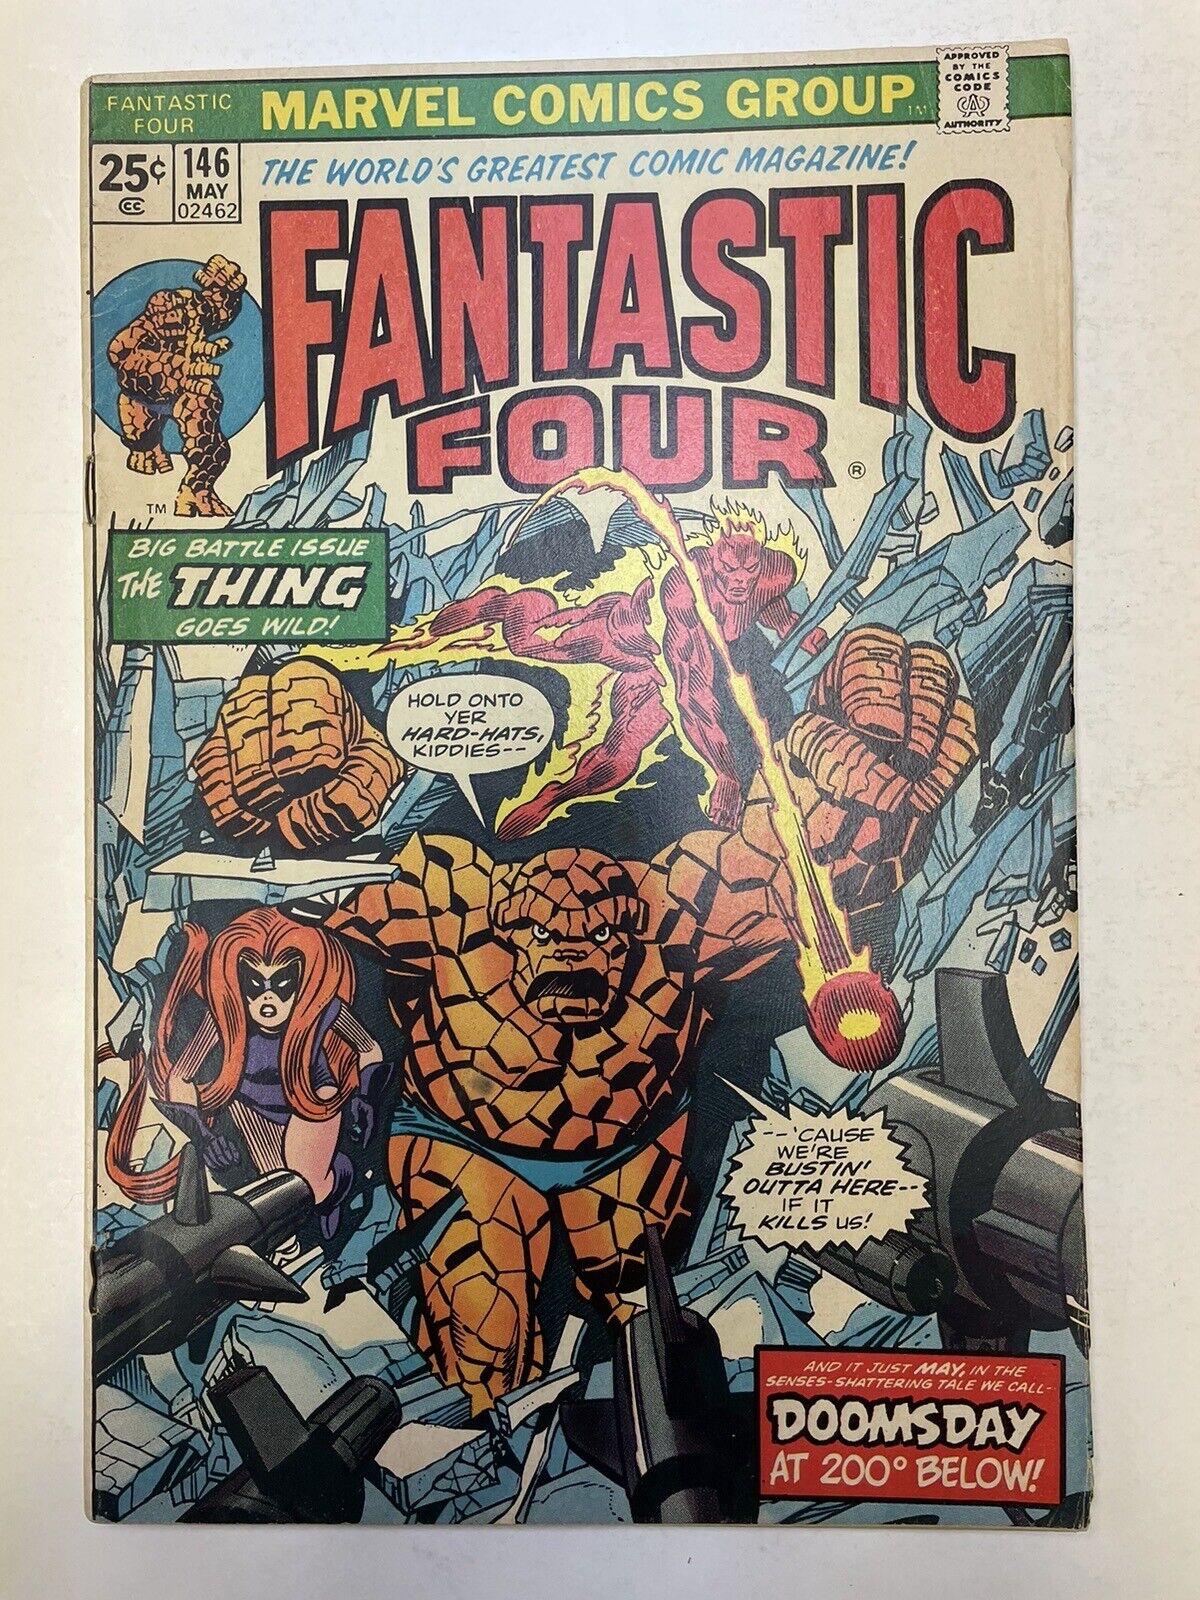 FANTASTIC FOUR #146 DOOMSDAY AT 200 FEET BELOW-THING GOES WILD 1974 Marvel Comic